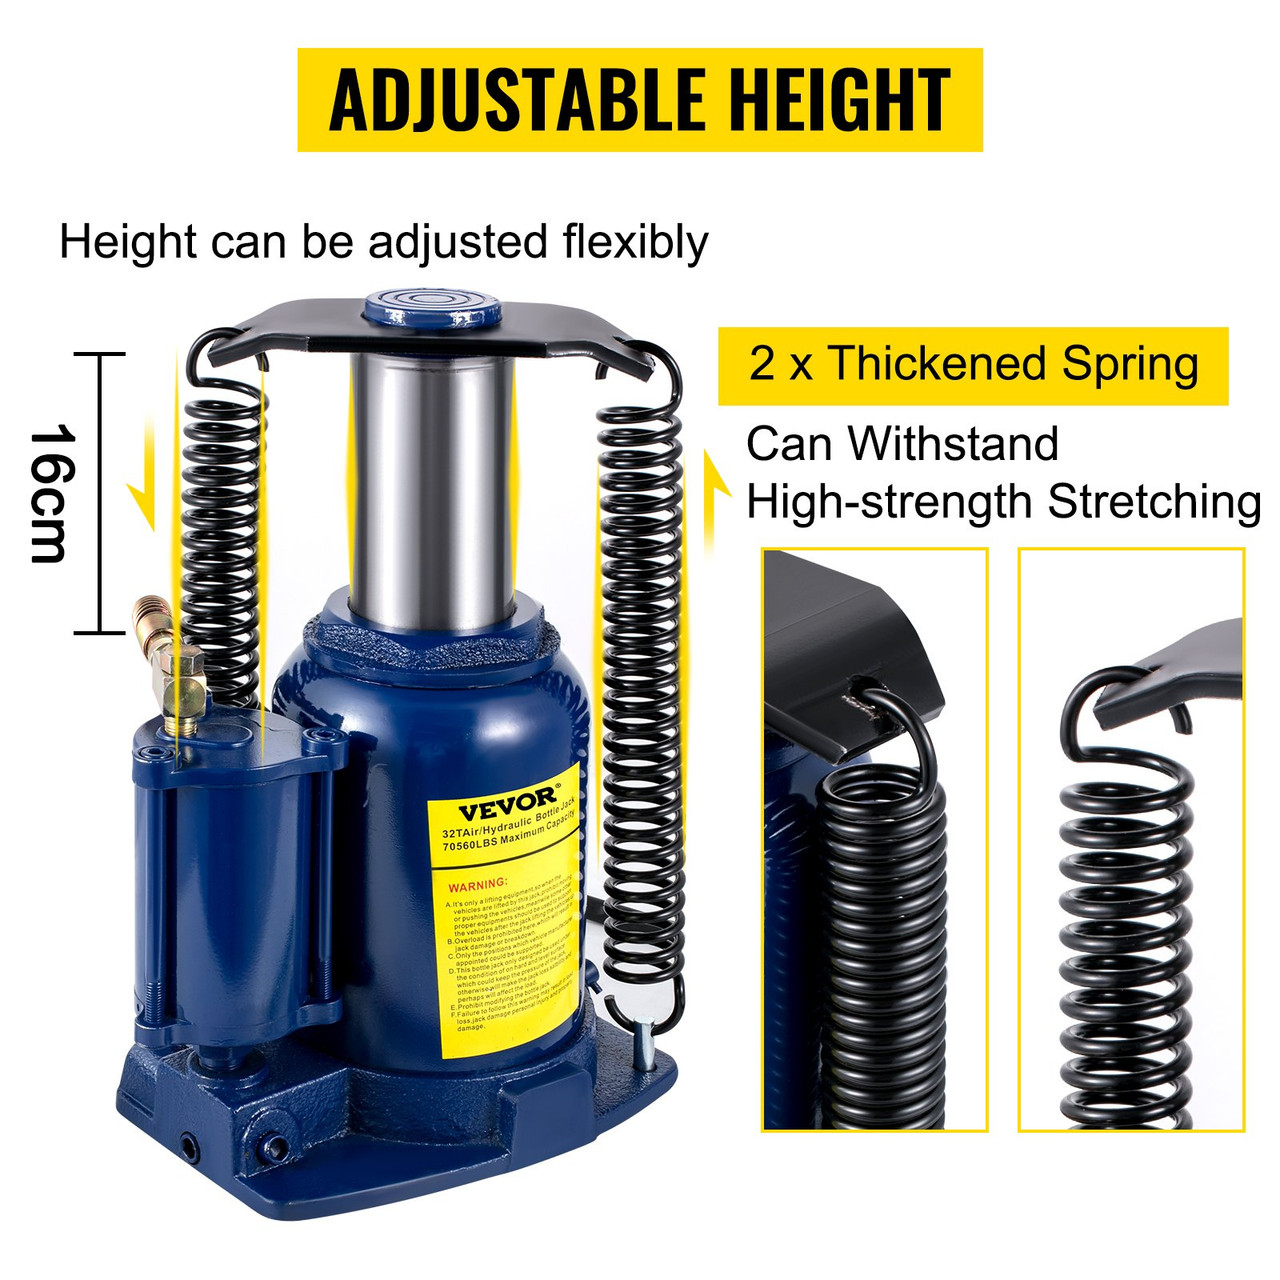 Air Hydraulic Bottle Jack, 32 Ton/70550lbs Pneumatic Hydraulic Bottle Jack, Pneumatic/Manual Dual Operation High Lift Bottle Jack, with Manual Hand Pump for Heavy Duty Auto Truck RV Repair Lift